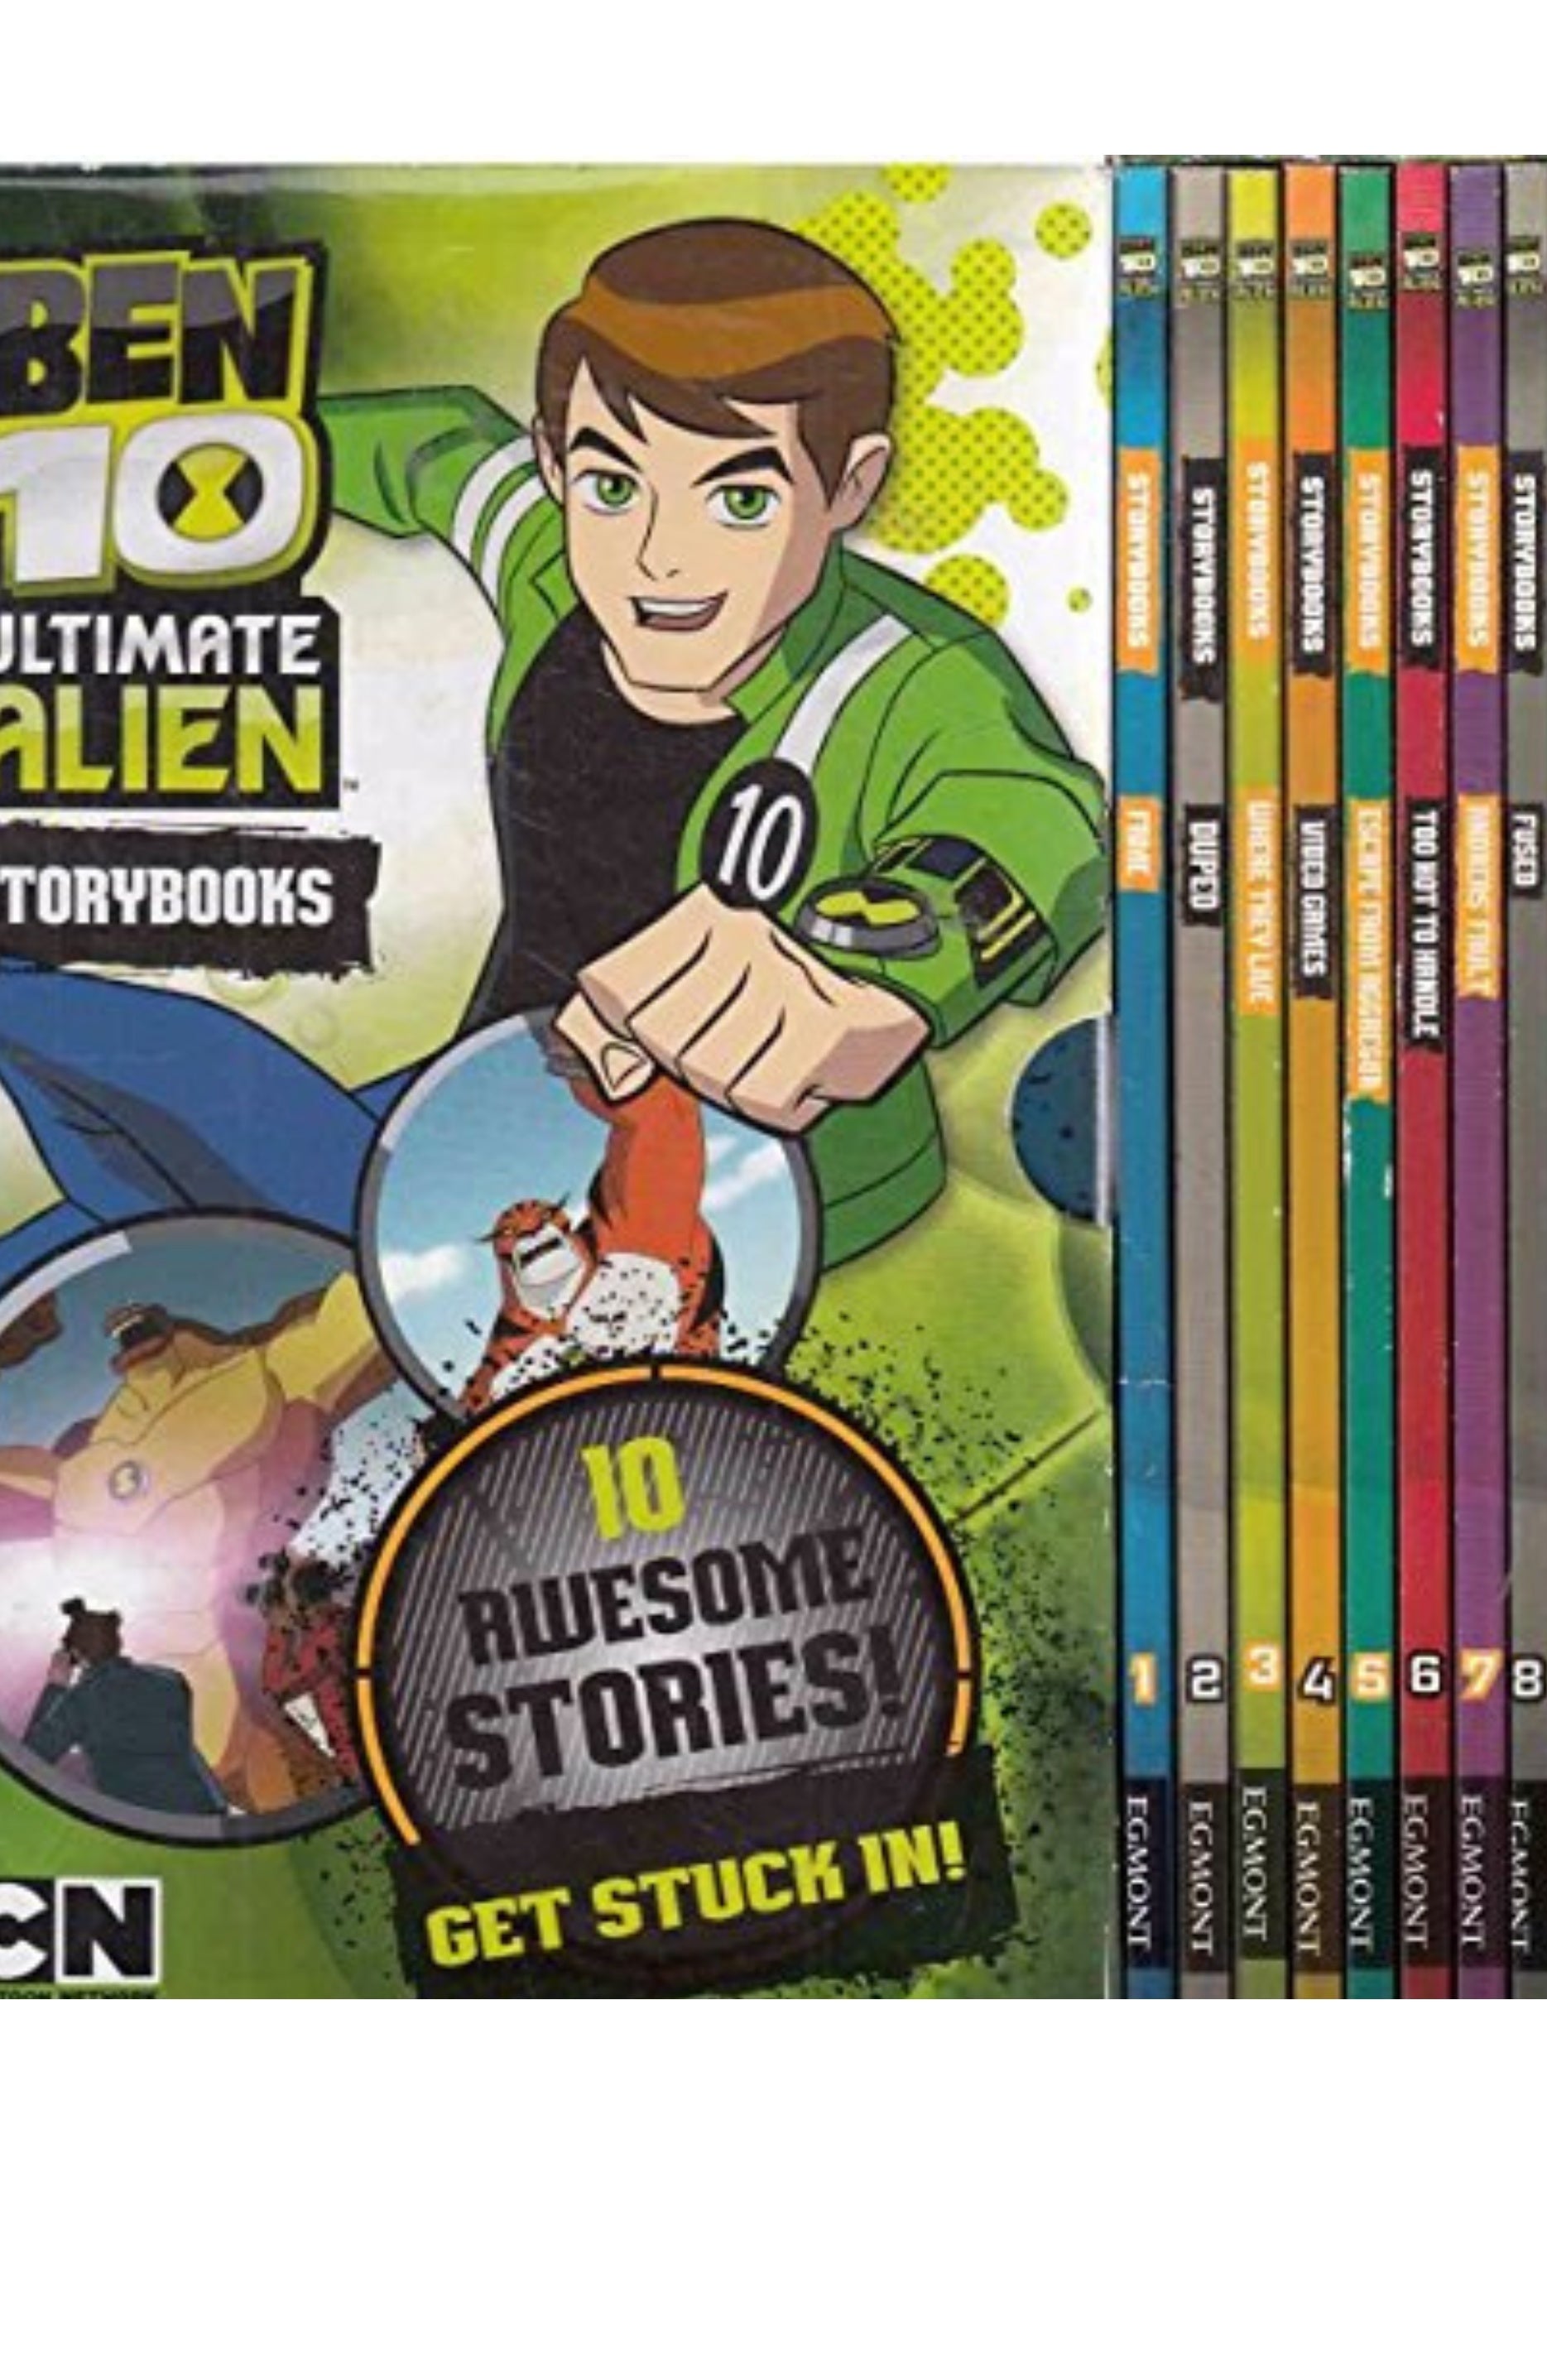 Ben 10 Ultimate Alien Storybooks Collection (10 Books in Box Set)